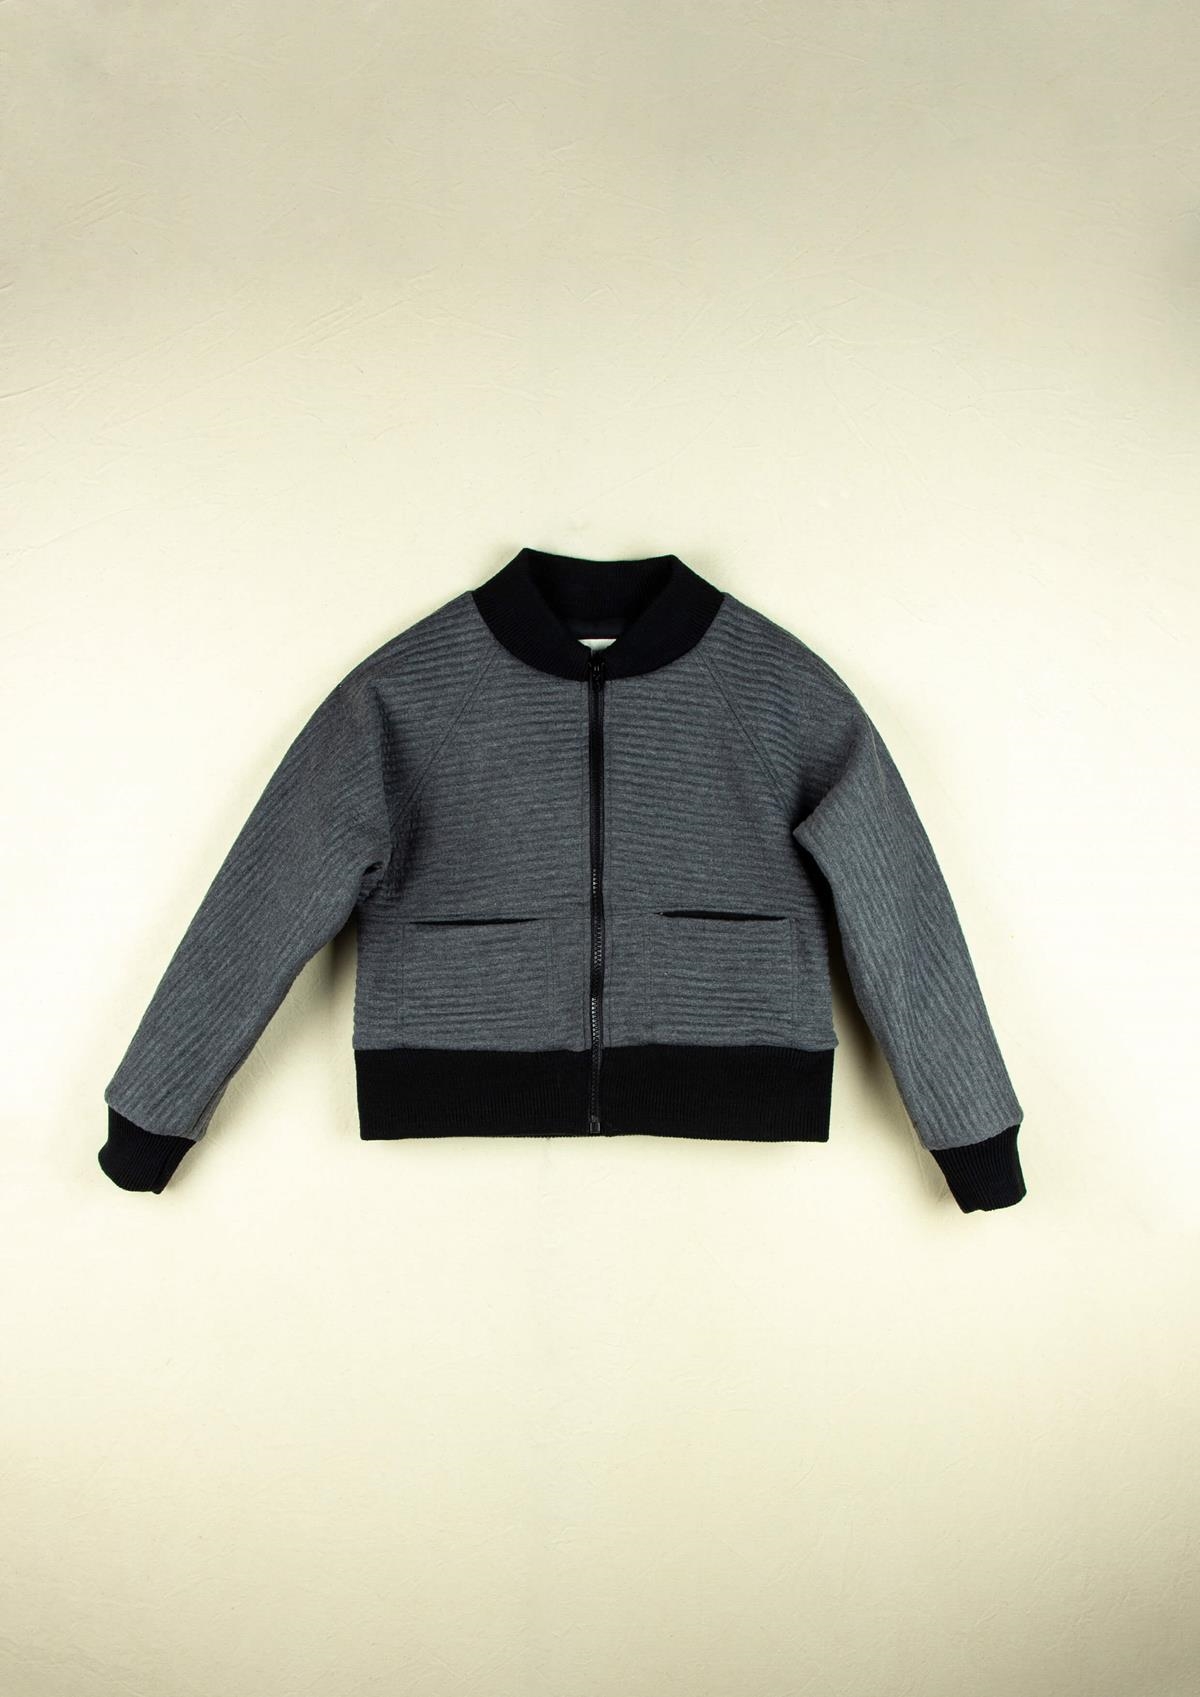 Mod.33.1 Grey knitted jacket | AW20.21 Mod.33.1 Grey knitted jacket | 1